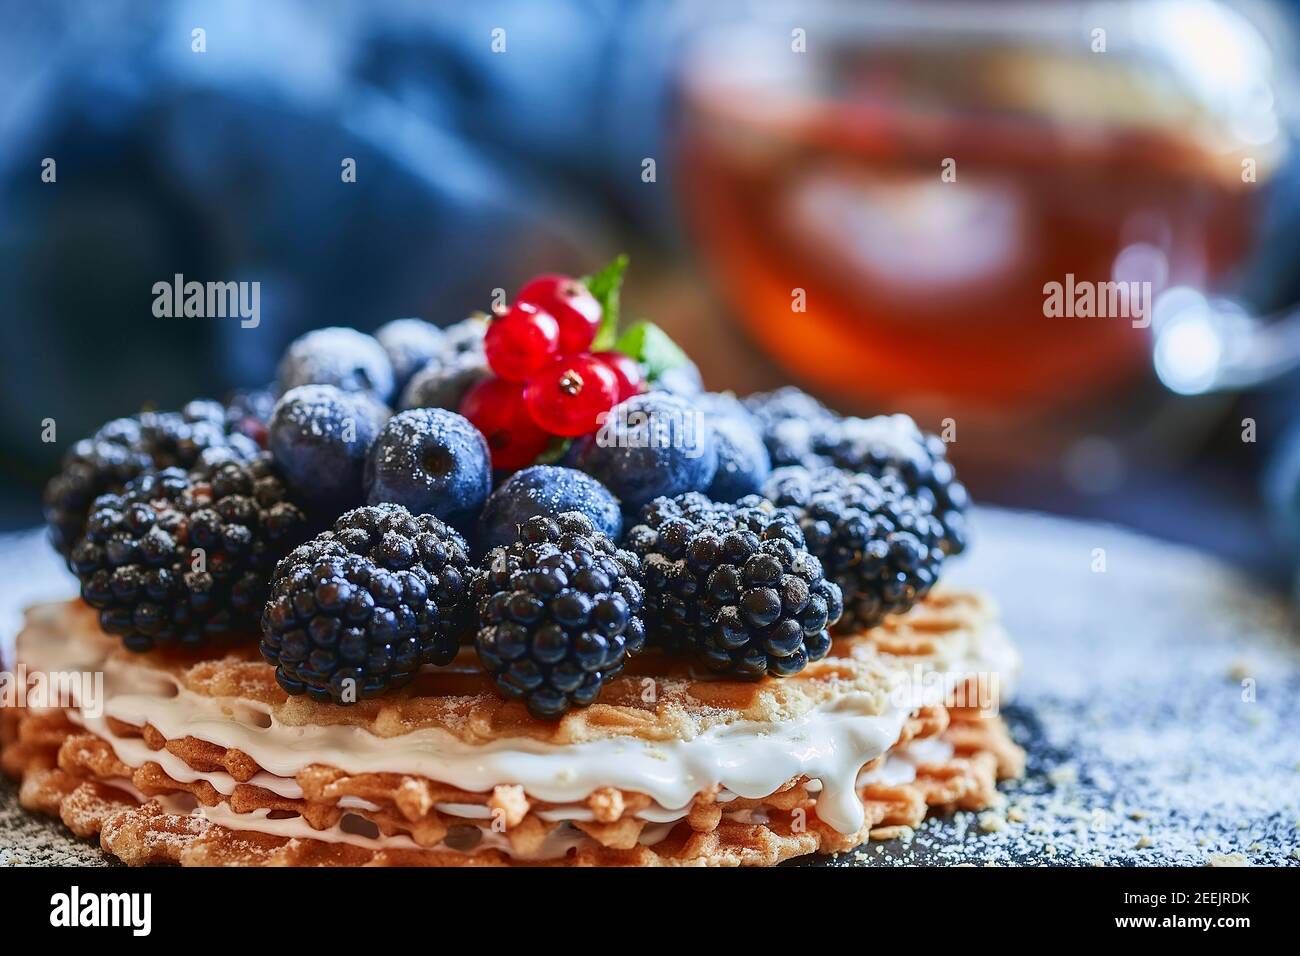 homemade waffles with blueberries and blackberries, powdered sugar on a stone plate with fruit. Shallow depth of field. Stock Photo